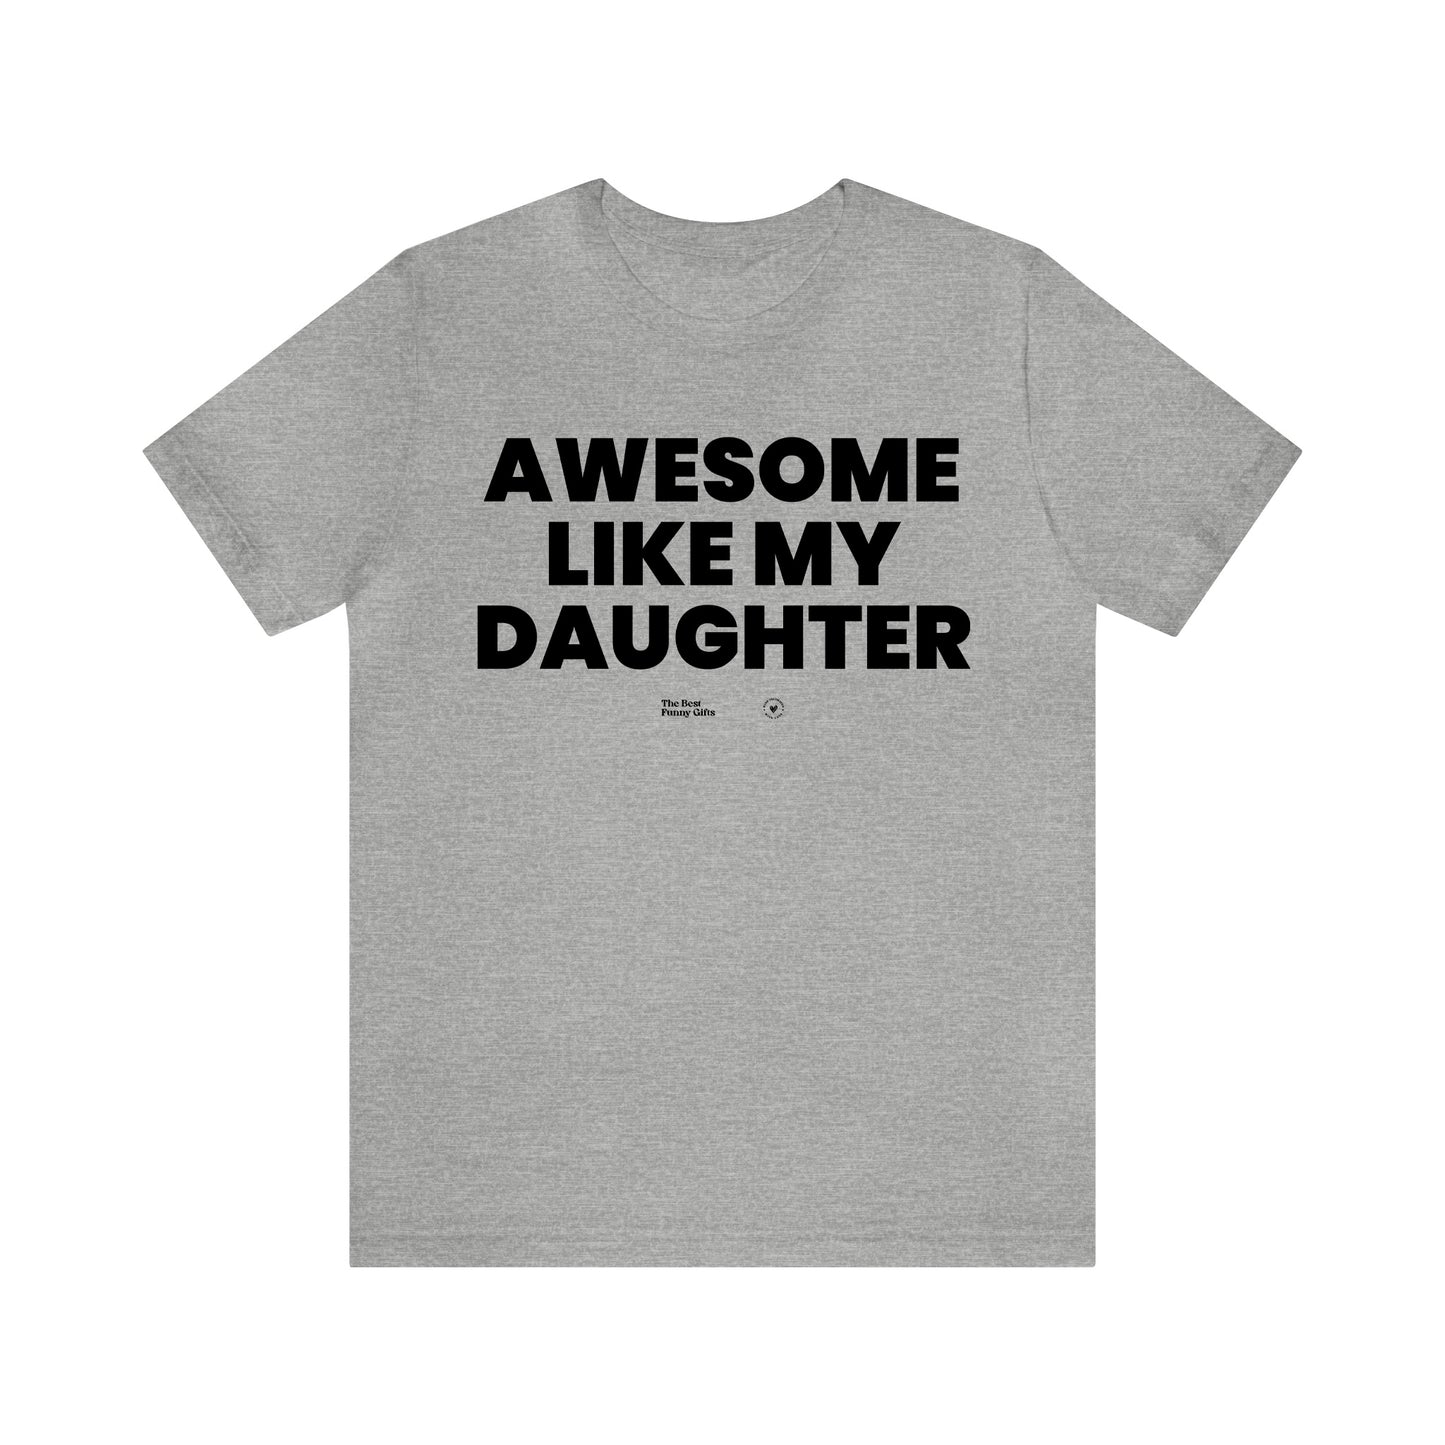 Mens T Shirts - Awesome Like My Daughter - Funny Men T Shirts